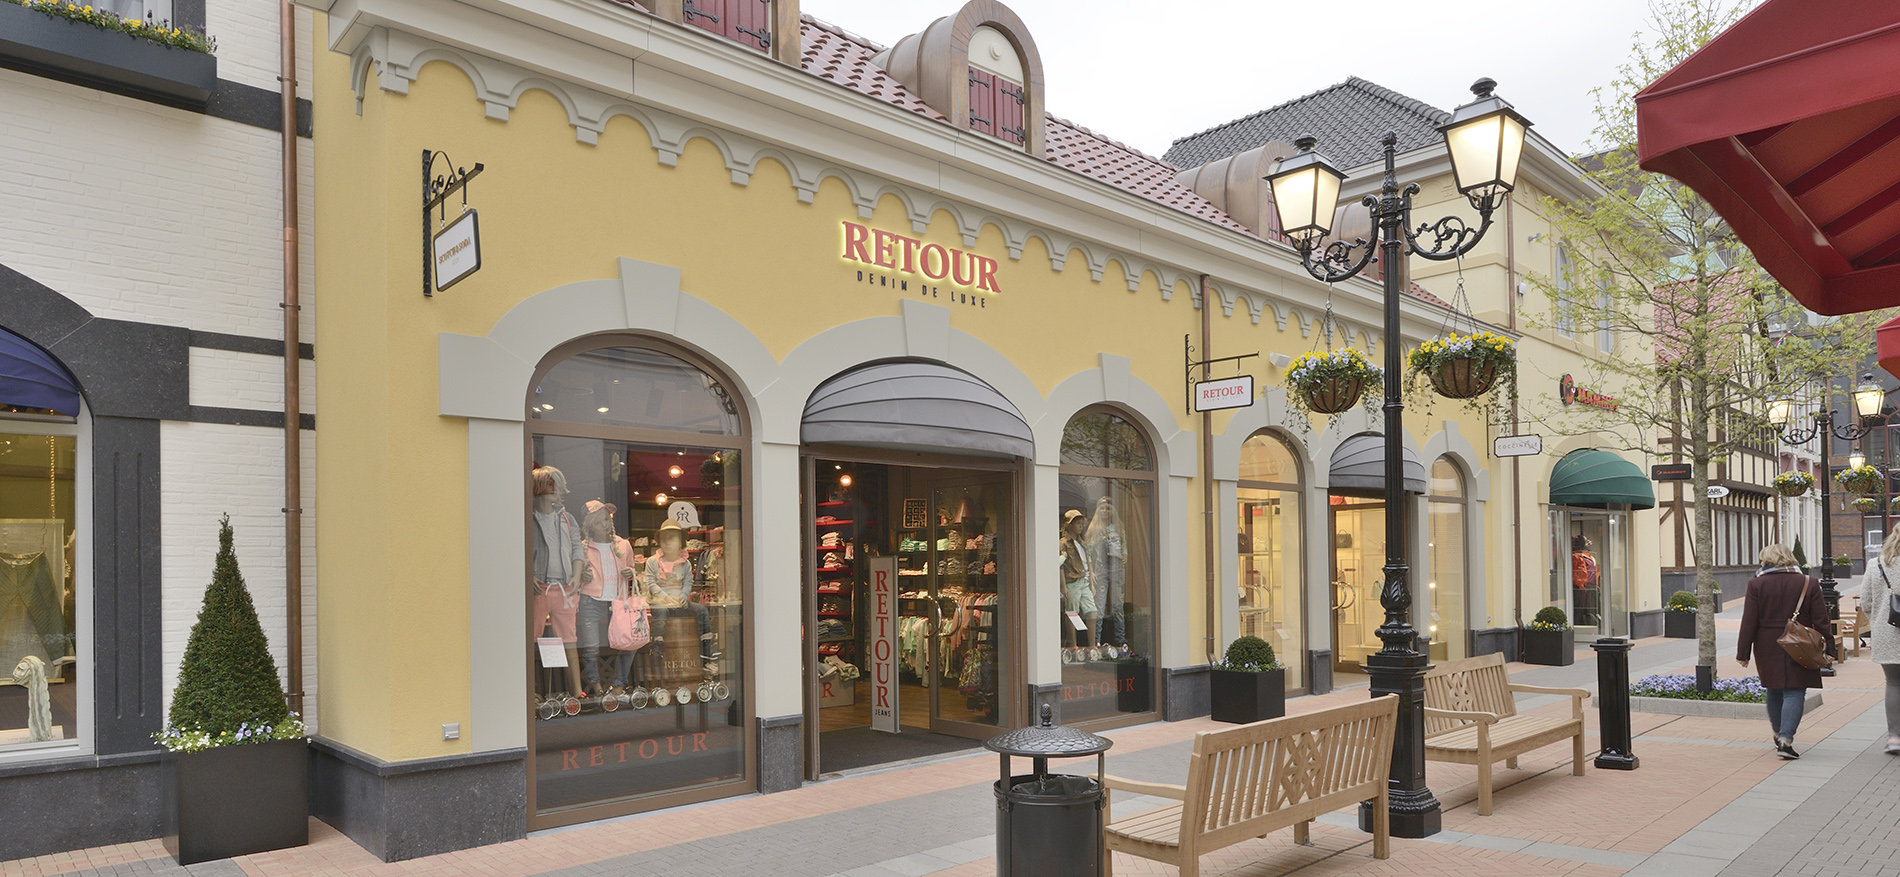 Roermond has gained an appealing store concept